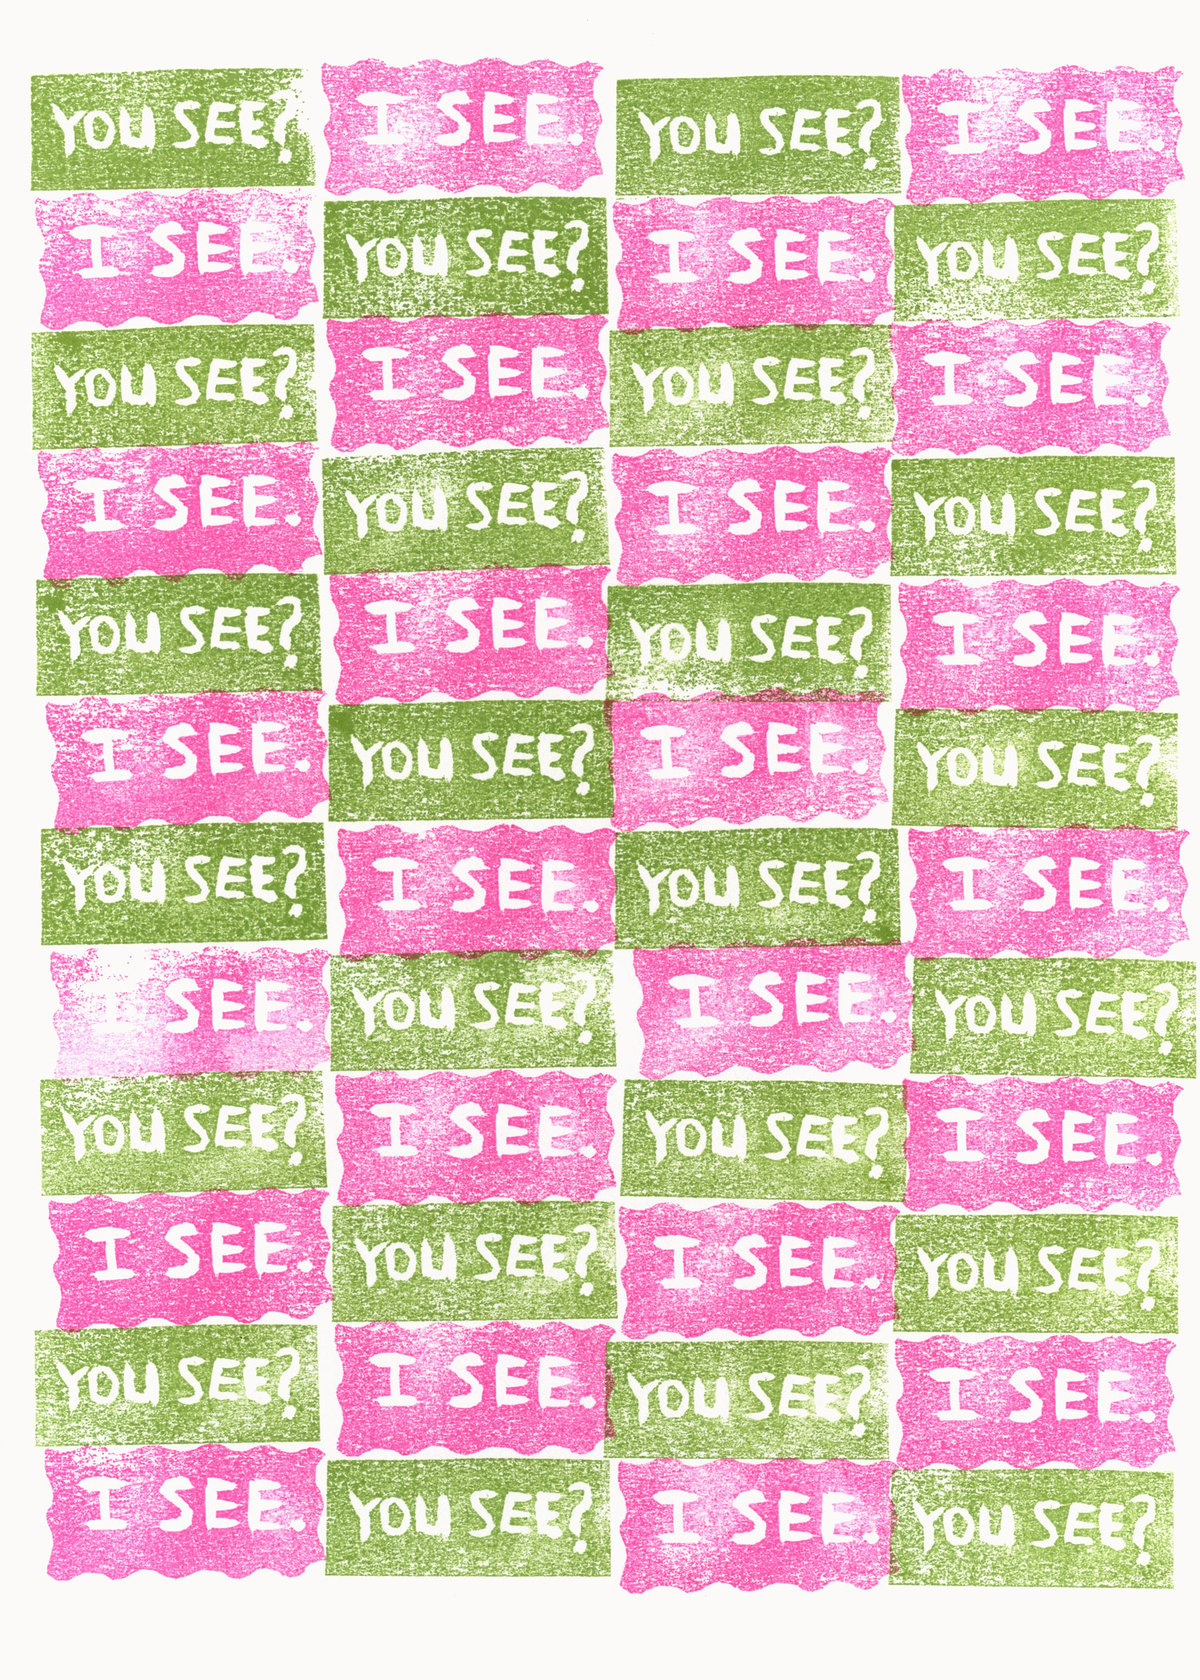 Image of You see? I see